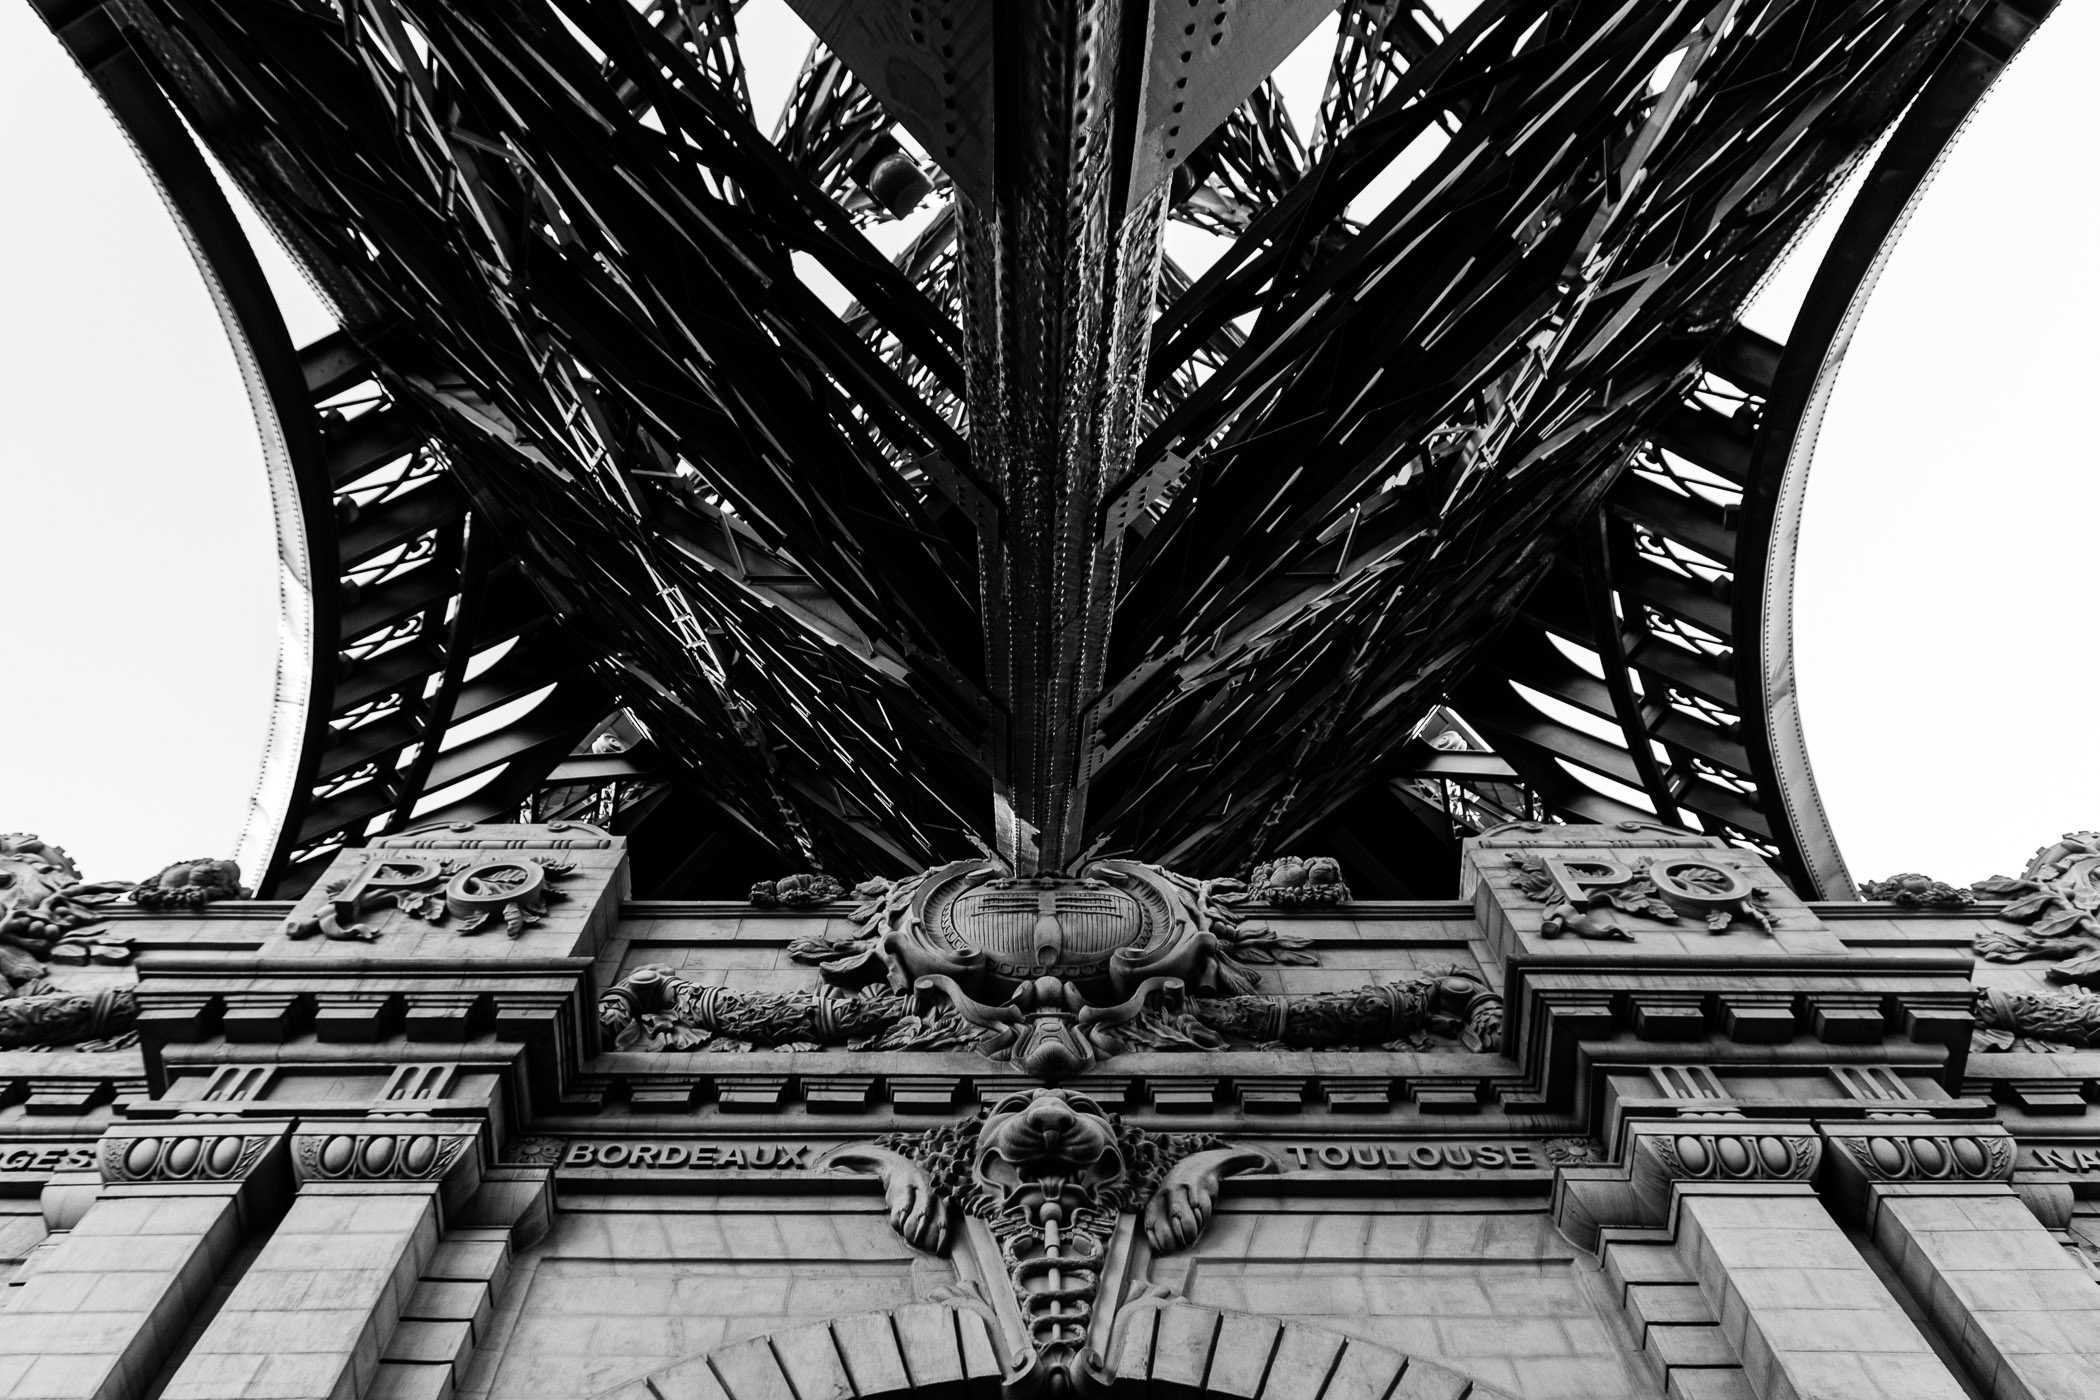 Detail of the structure of one of the legs of the reproduction of the Eiffel Tower at Paris Hotel & Casino, Las Vegas.